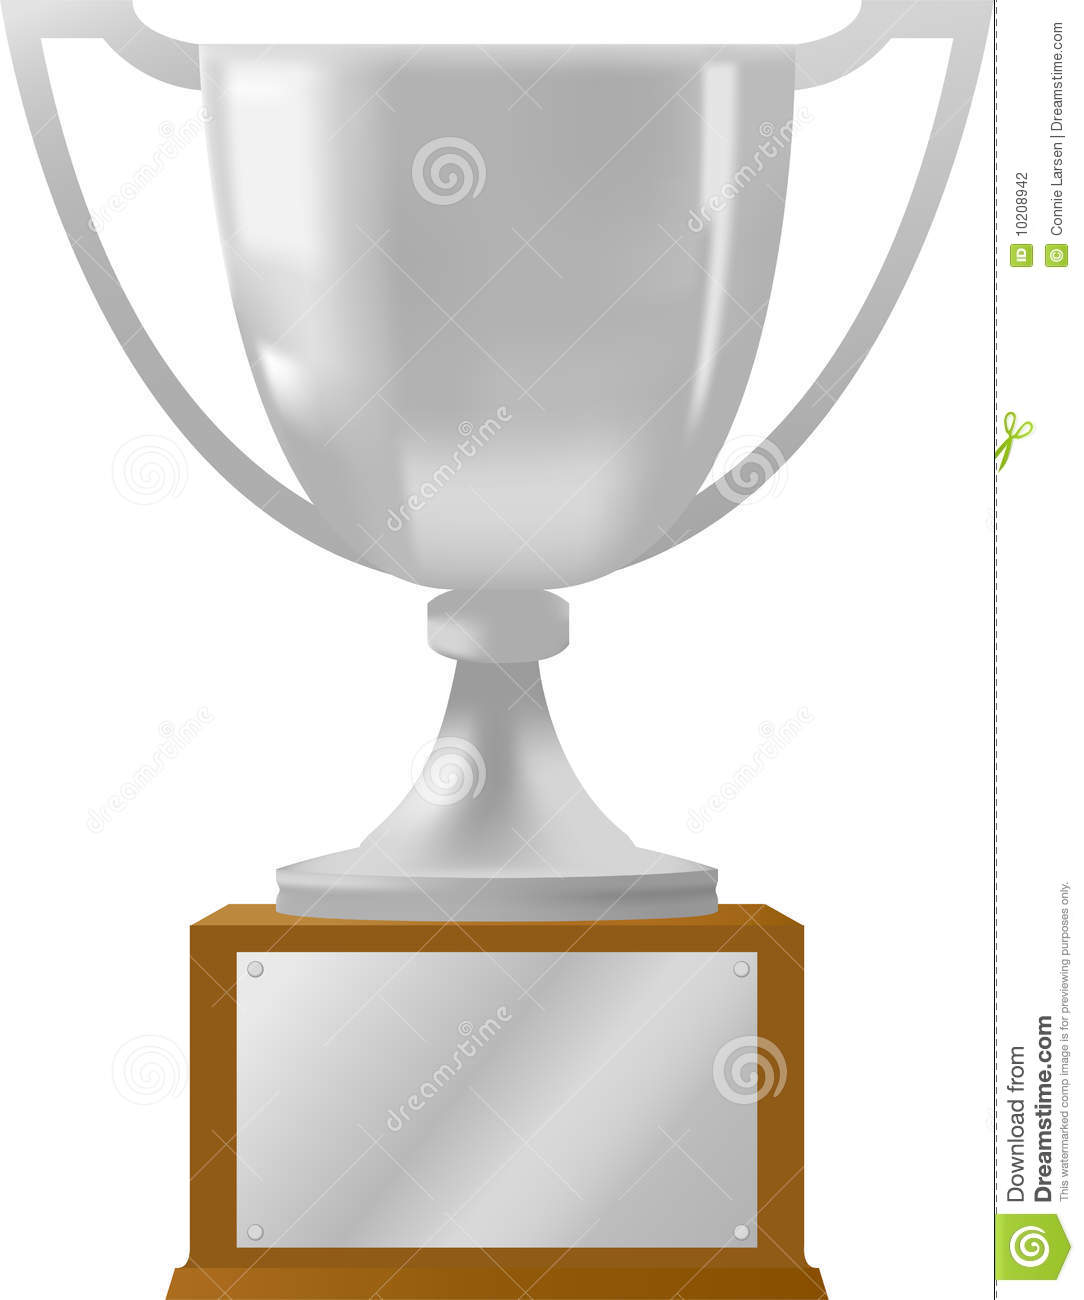 Illustration Of A Silver Loving Cup Type Trophy With A Plaque For